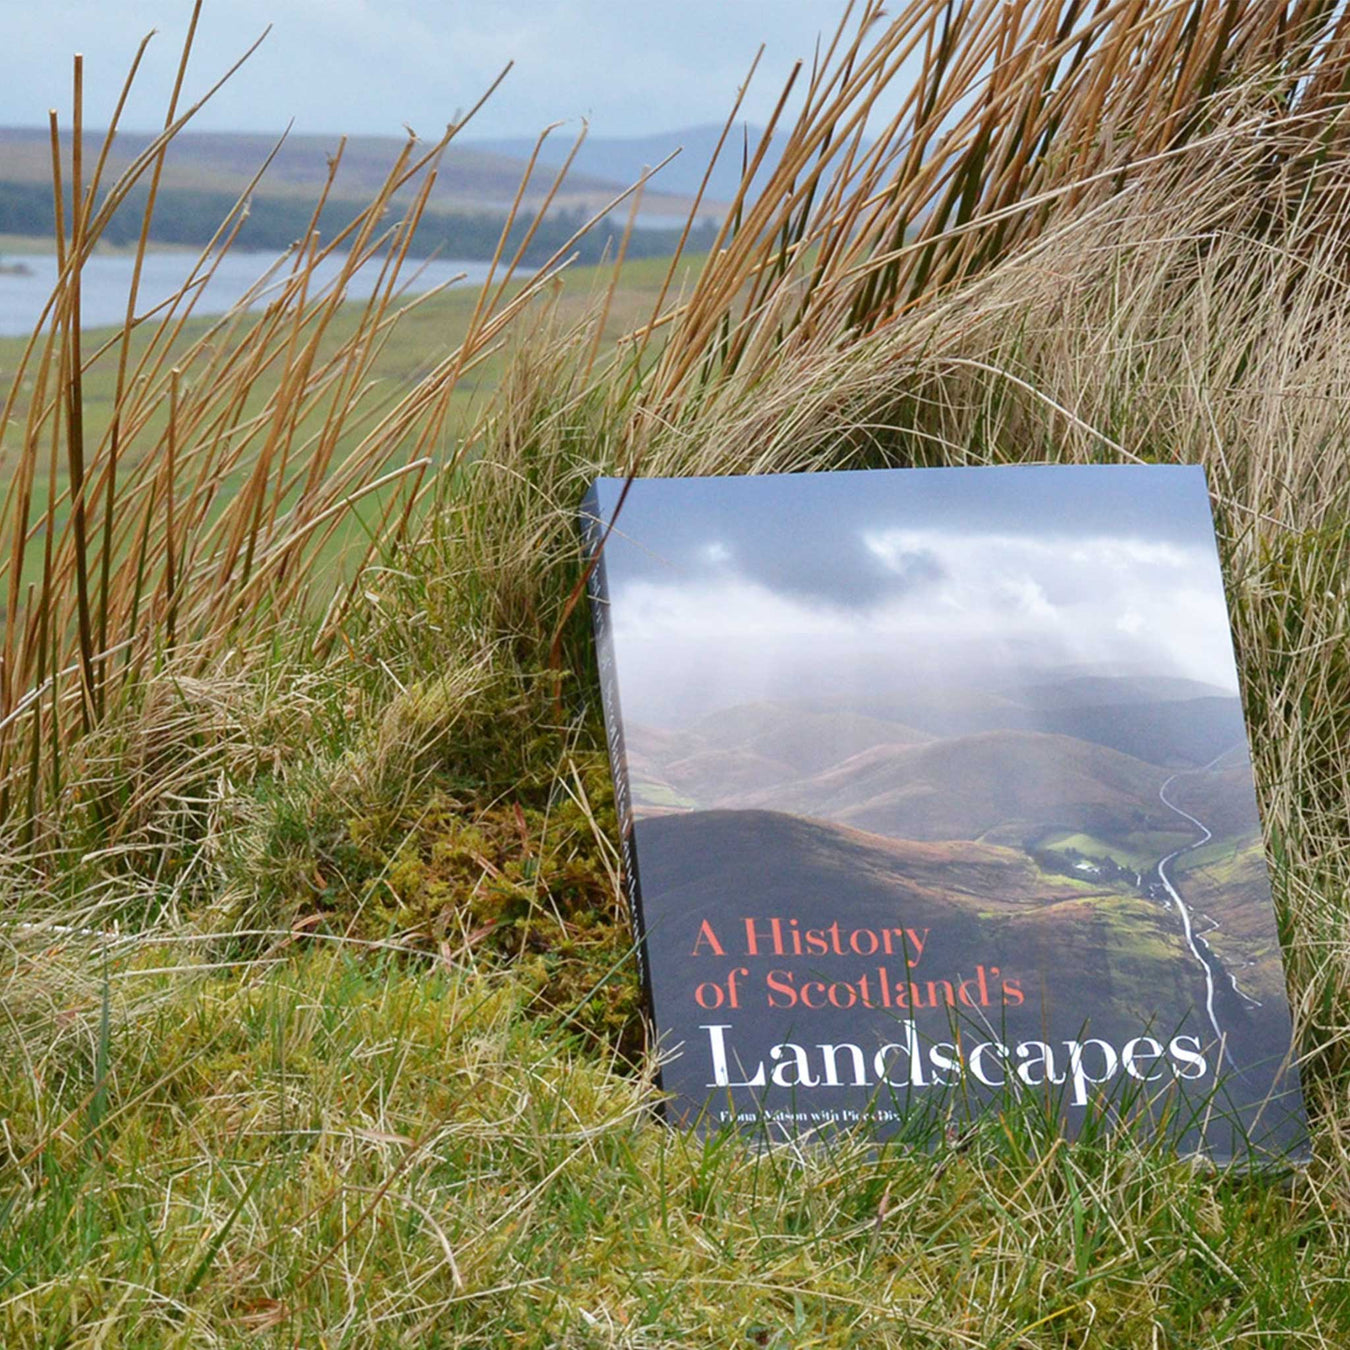 Large paperback copy of our Historic Scotland publication, 'A History of Scotland's Landscapes' lies on a grassy hill looking over a loch. 